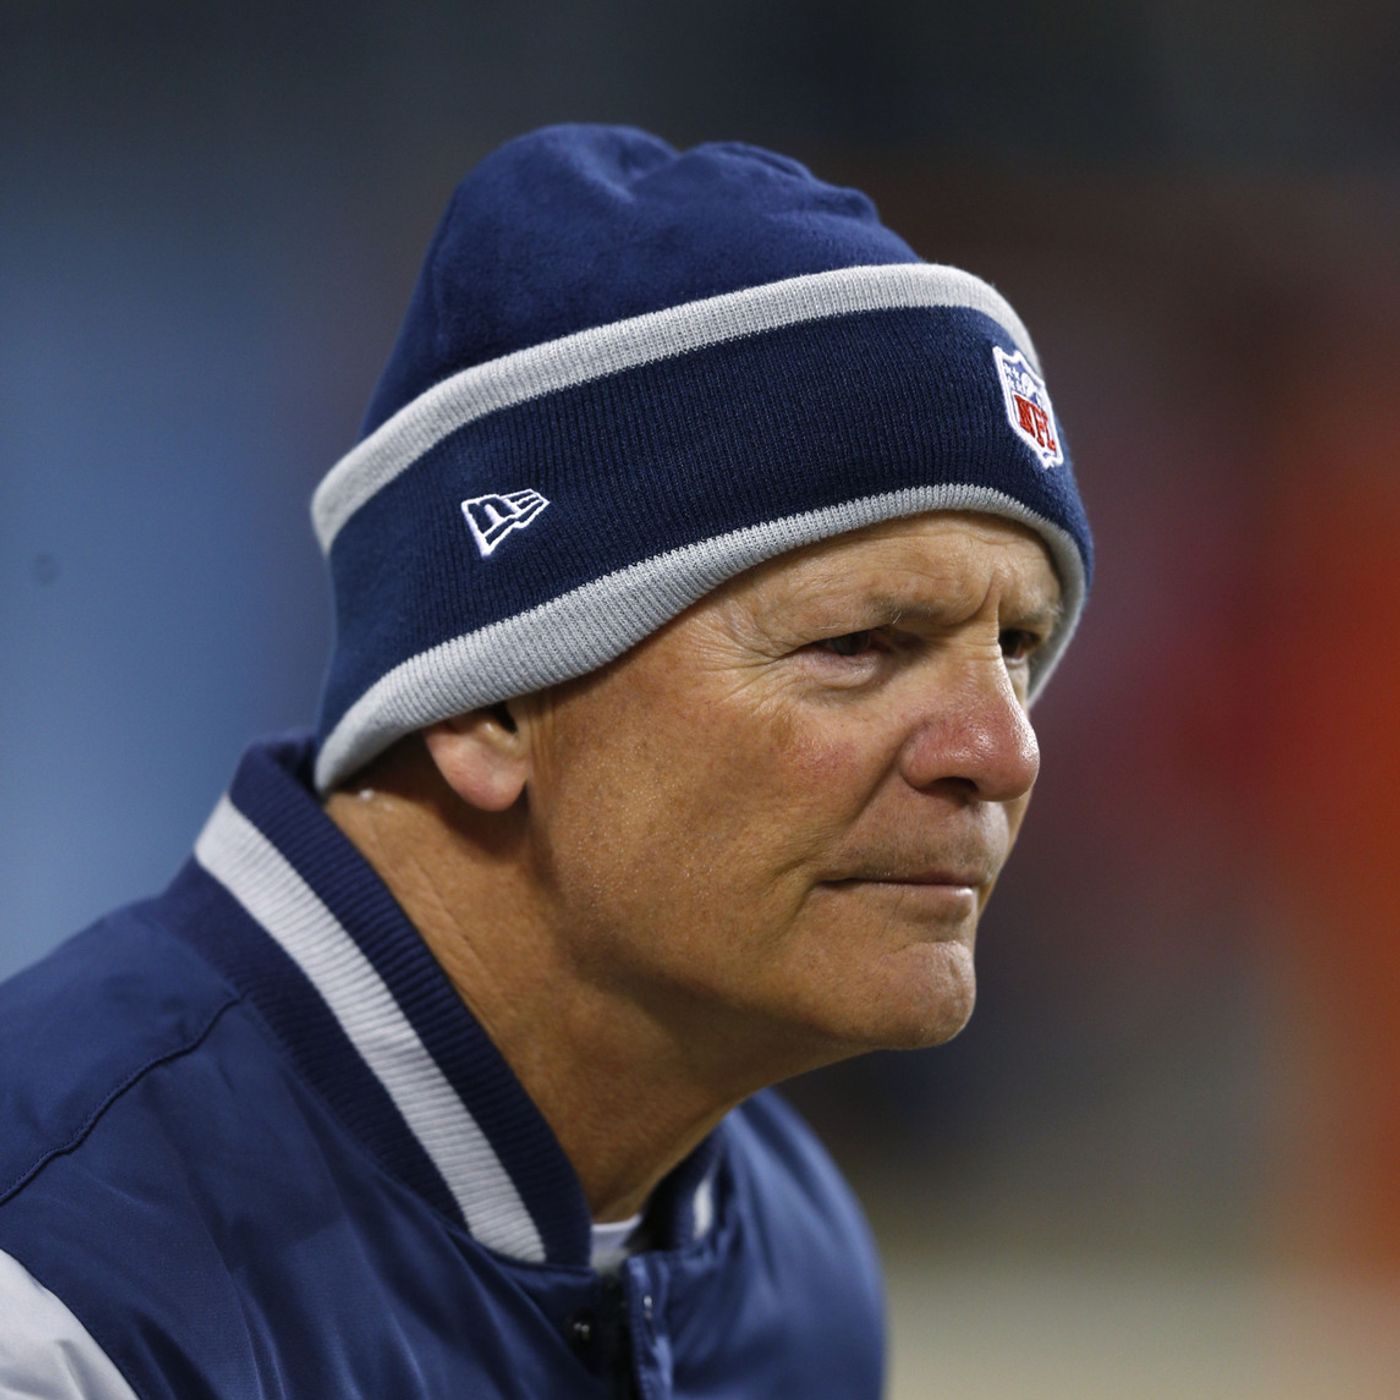 2017 Review focuses on Marinelli, Dez Bryant